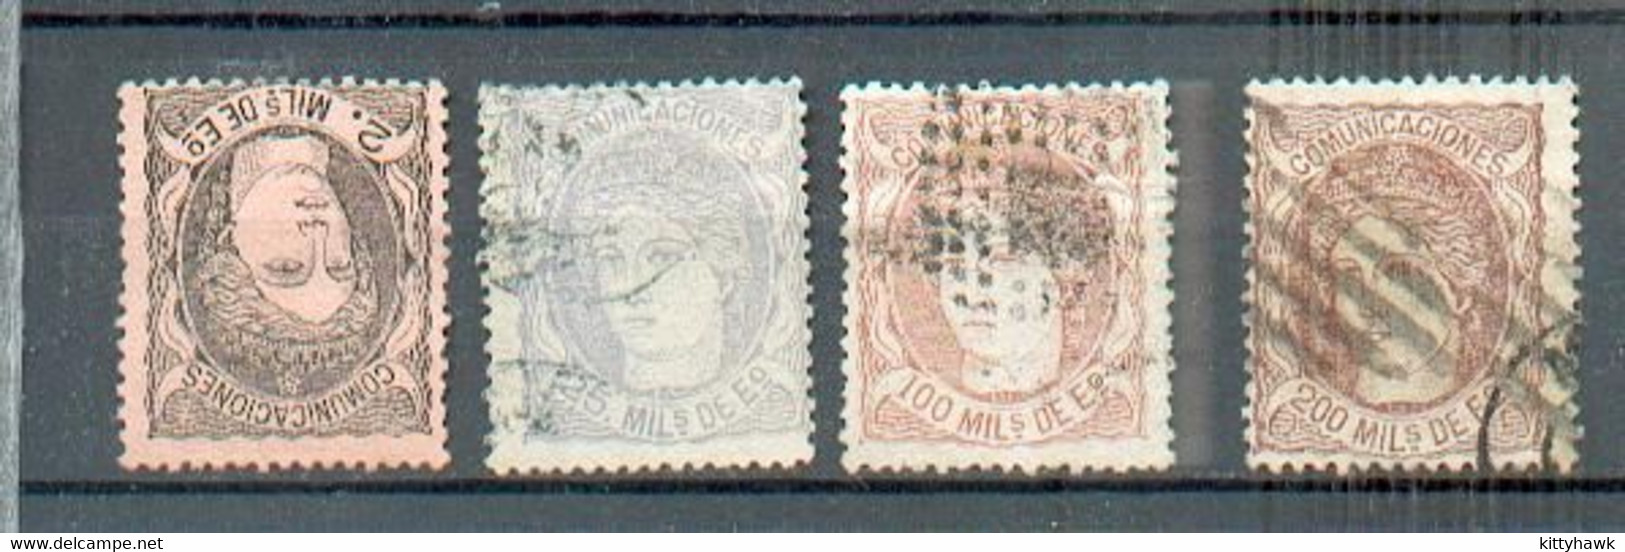 M 239 - ESPAGNE - YT 103 (*) - 106a-108-109  ° Obli - Used Stamps